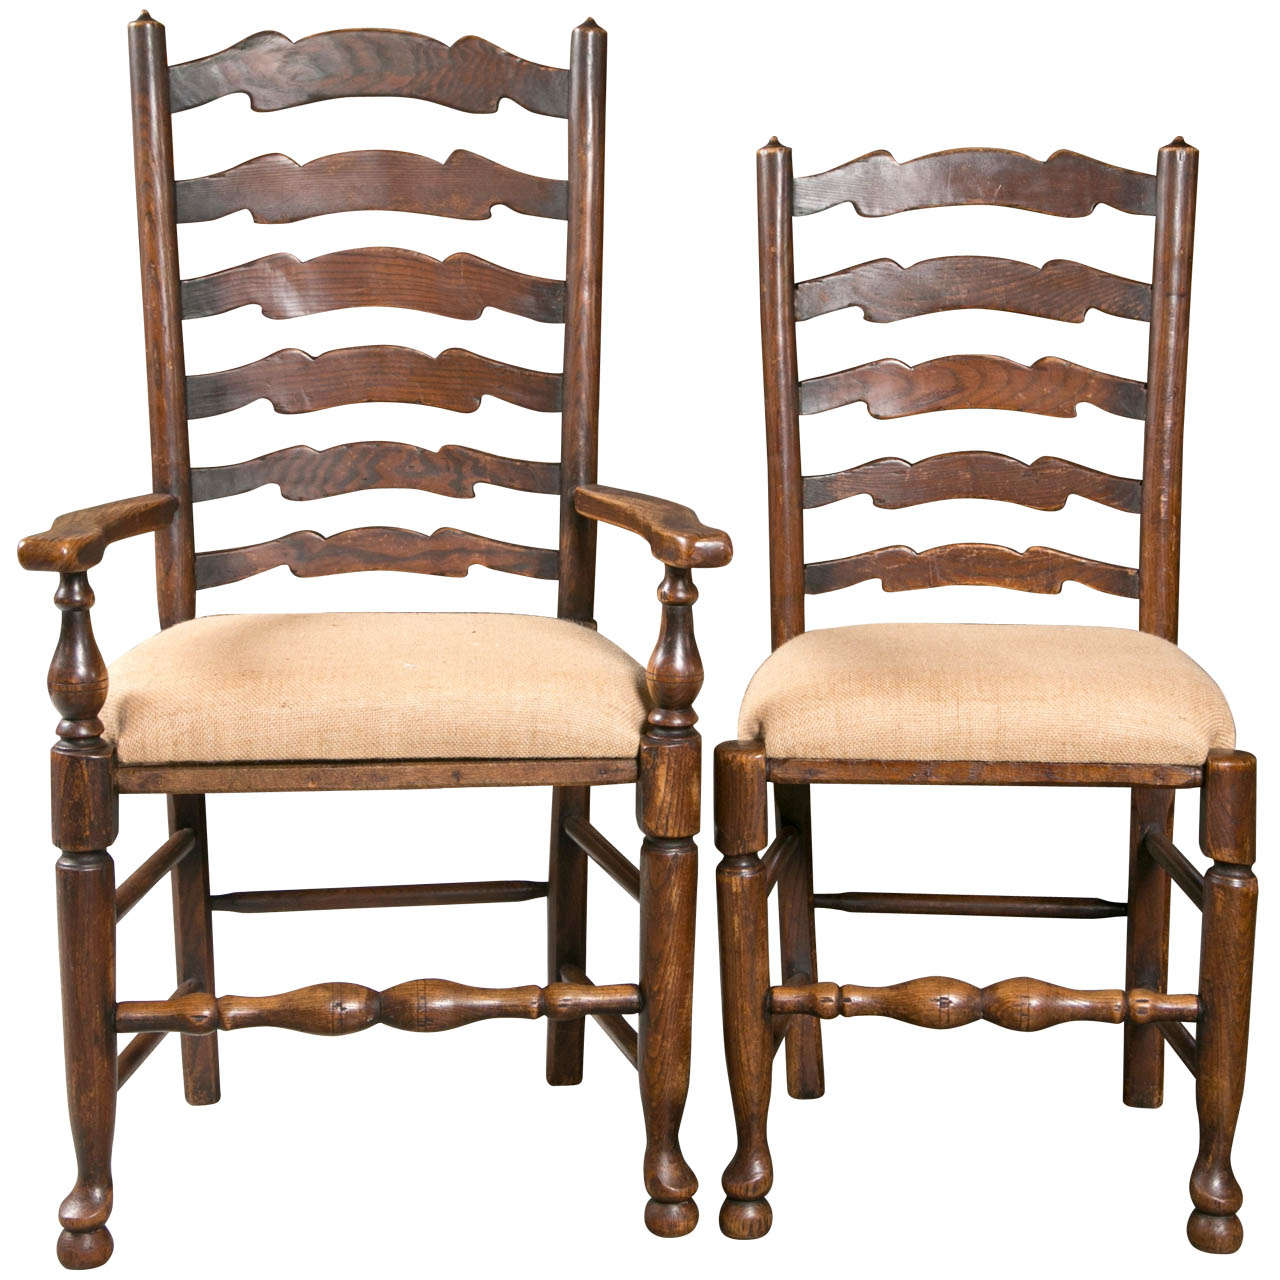 19th c Set of 6 Ladderback Chairs For Sale